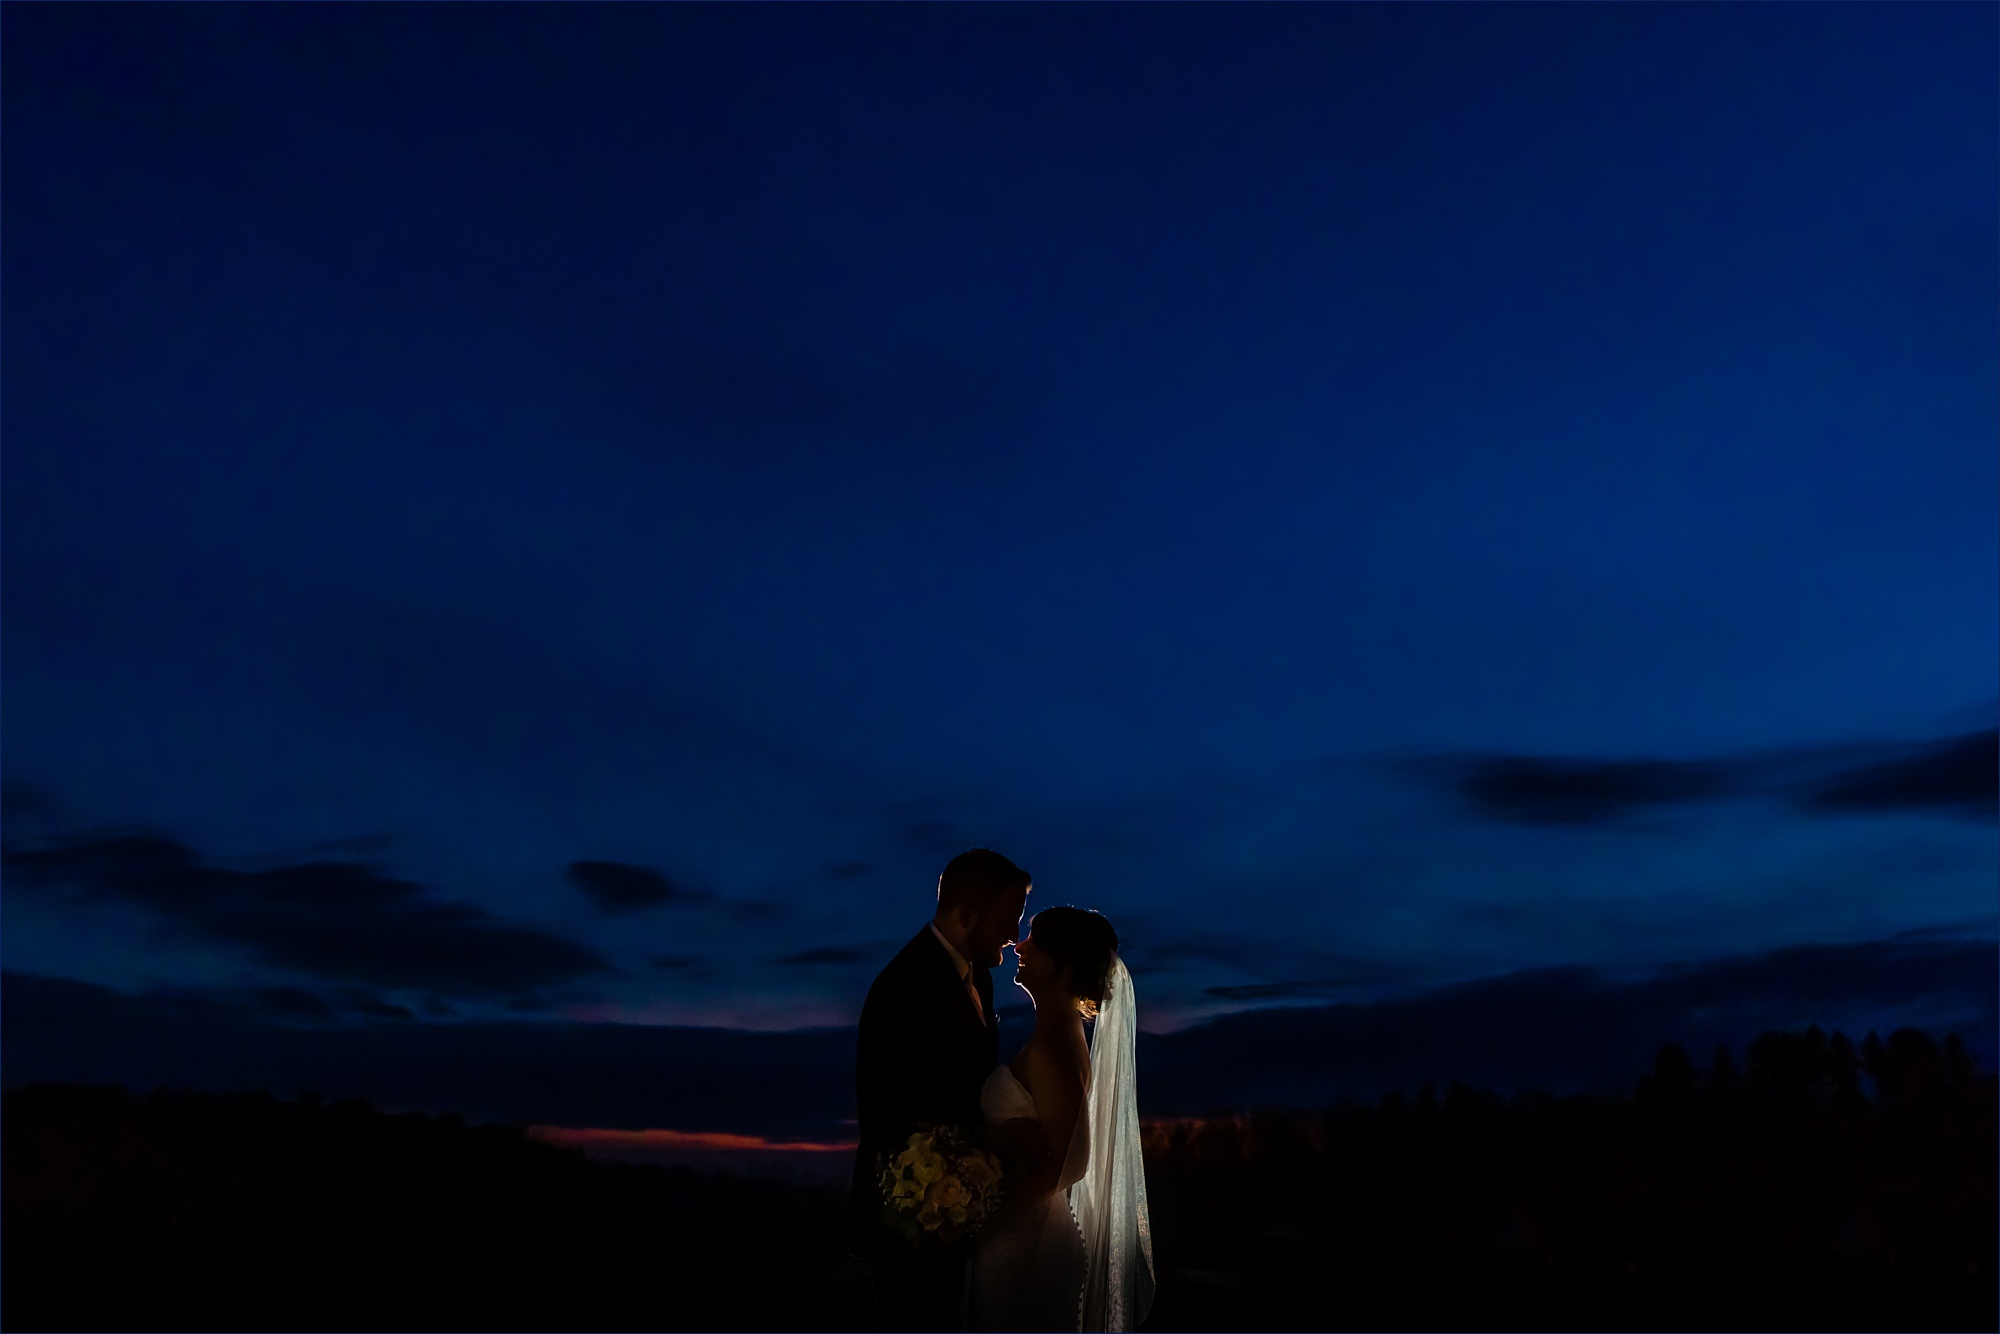 The newlyweds are silhouetted against the deep blue southern Maine sky at their Red Barn at Outlook Farm wedding day